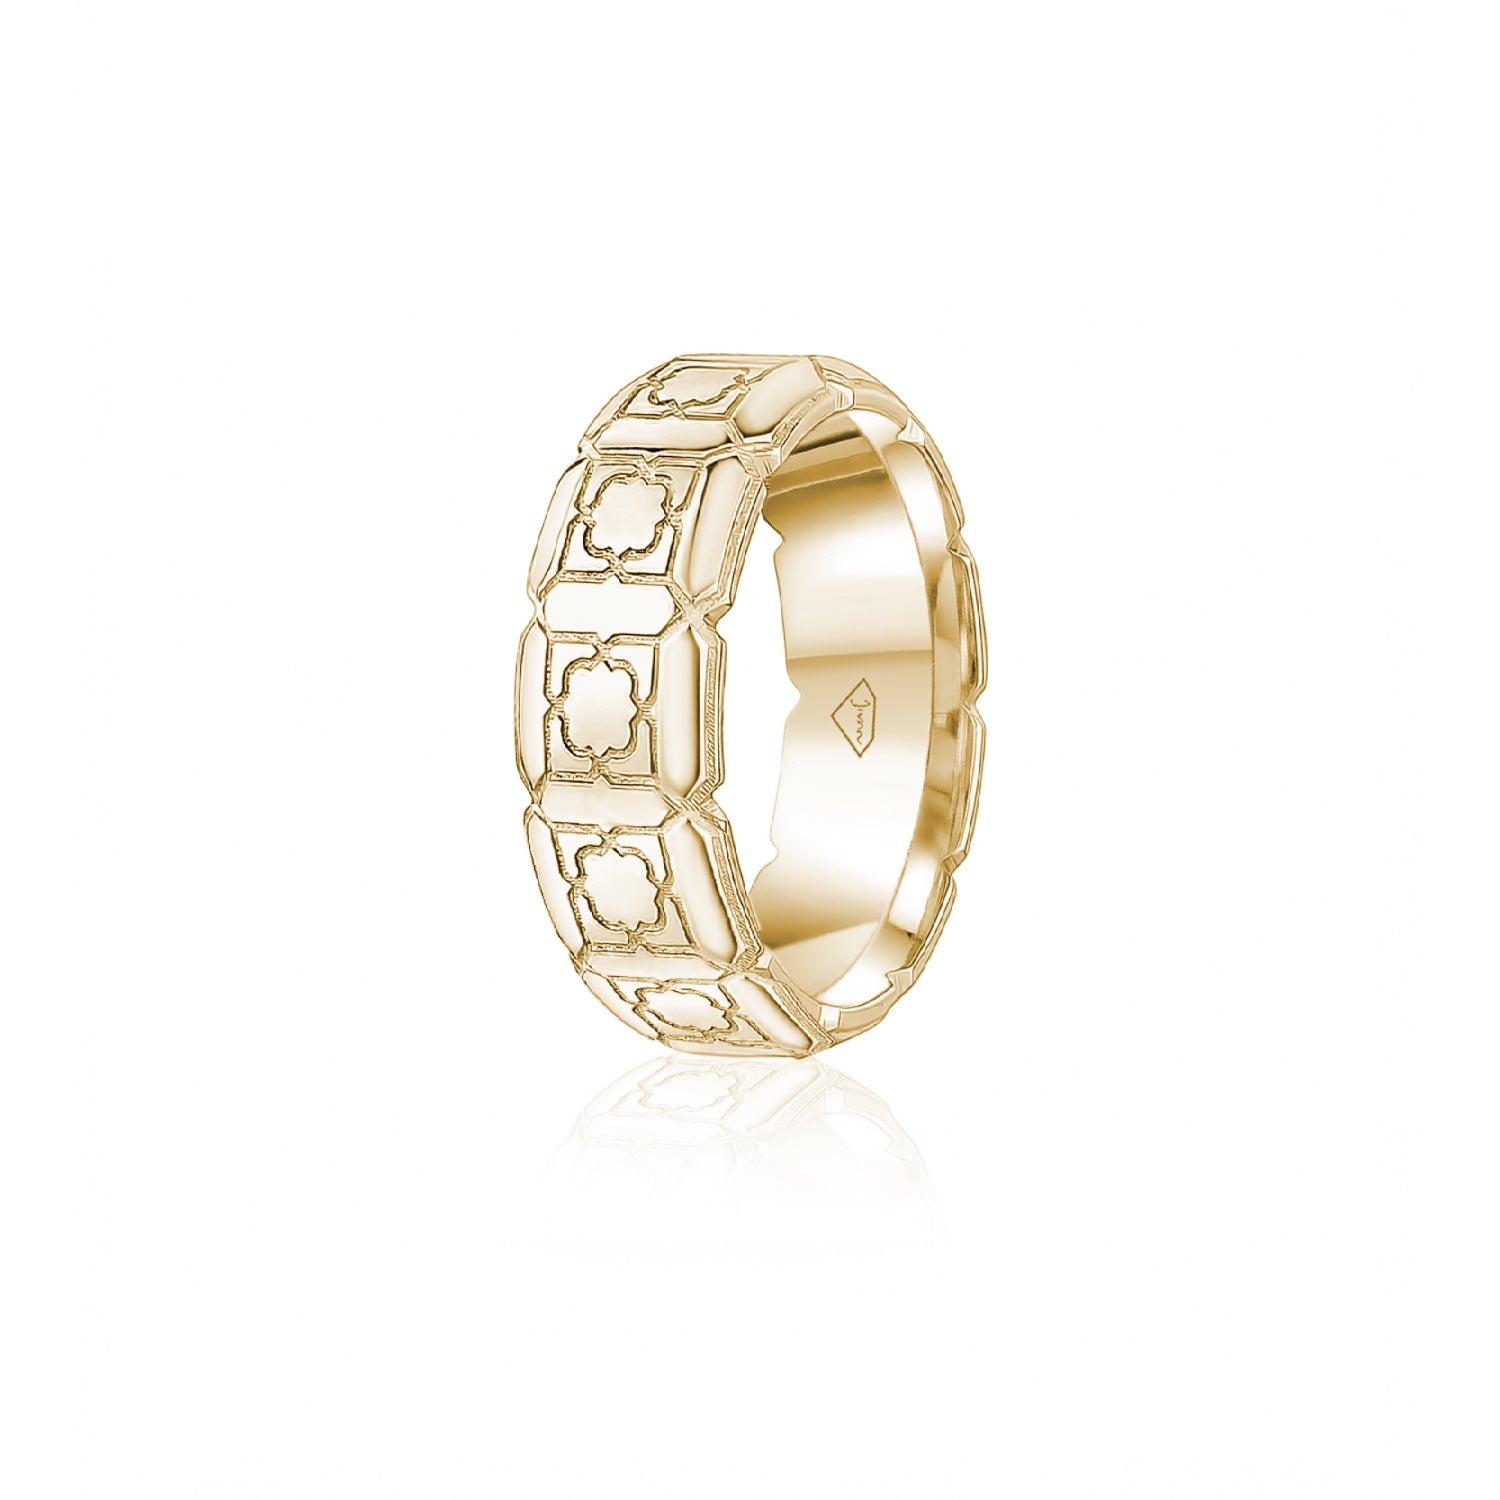 Engraved Motif Polished Finish Standard Fit 6-7 mm Wedding Band in Yellow Gold